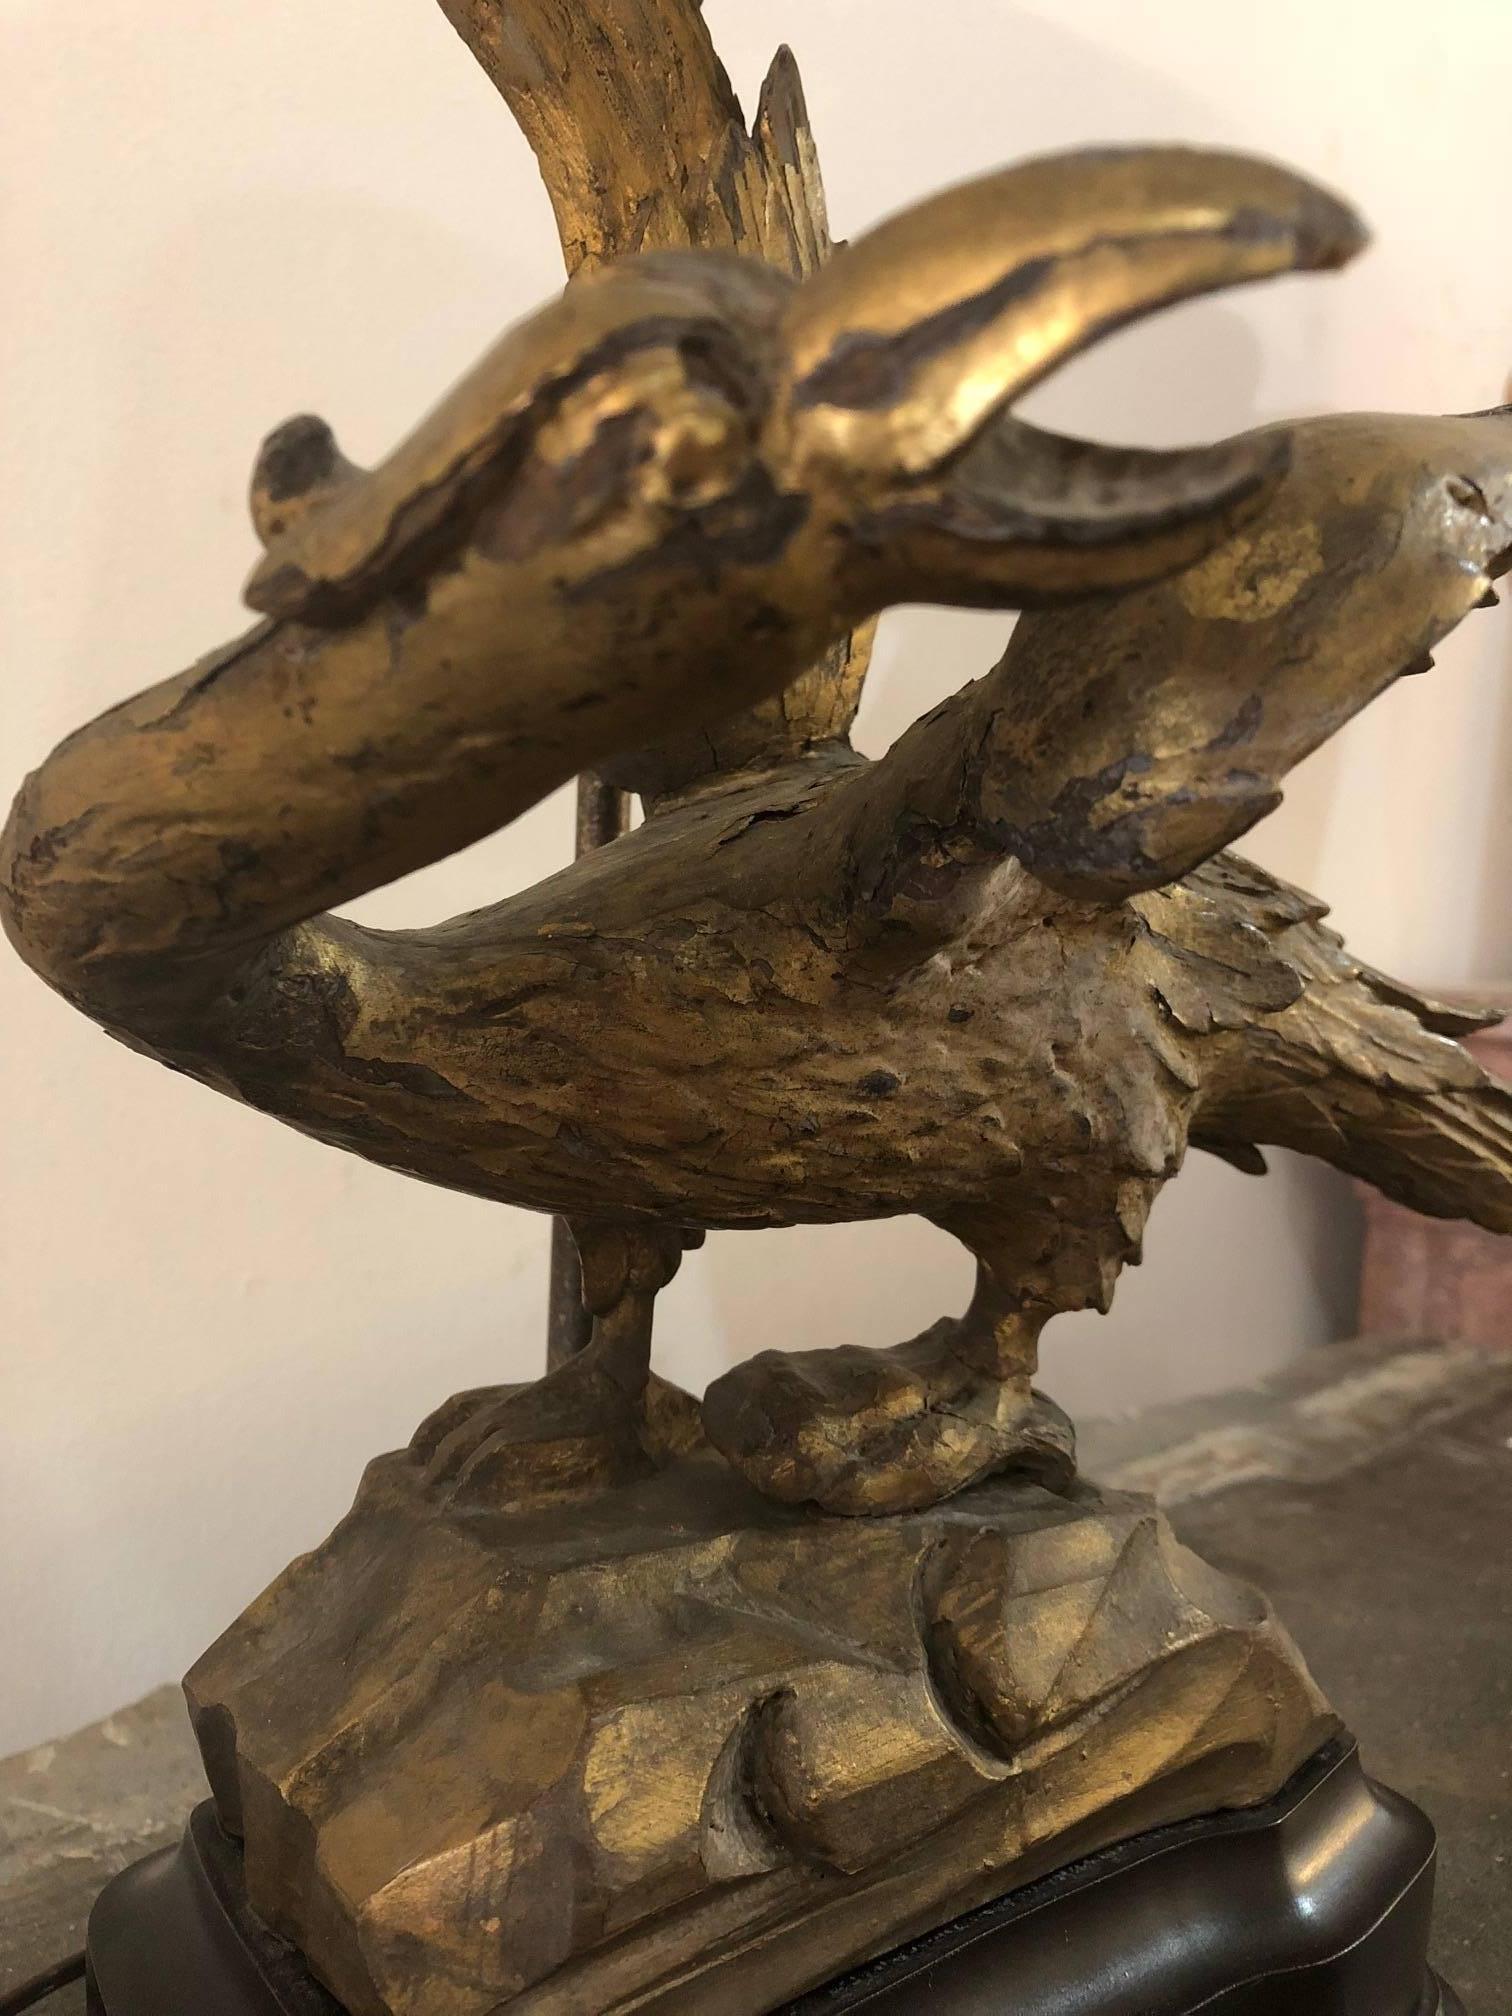 This lovely pair of early 20th century Ho Ho bird lamps are a perfect addition to your collection, they have been said to bring luck, symbolizing good fortune; specifically longevity, fidelity and wisdom! The Ho Ho bird comes from the mythical